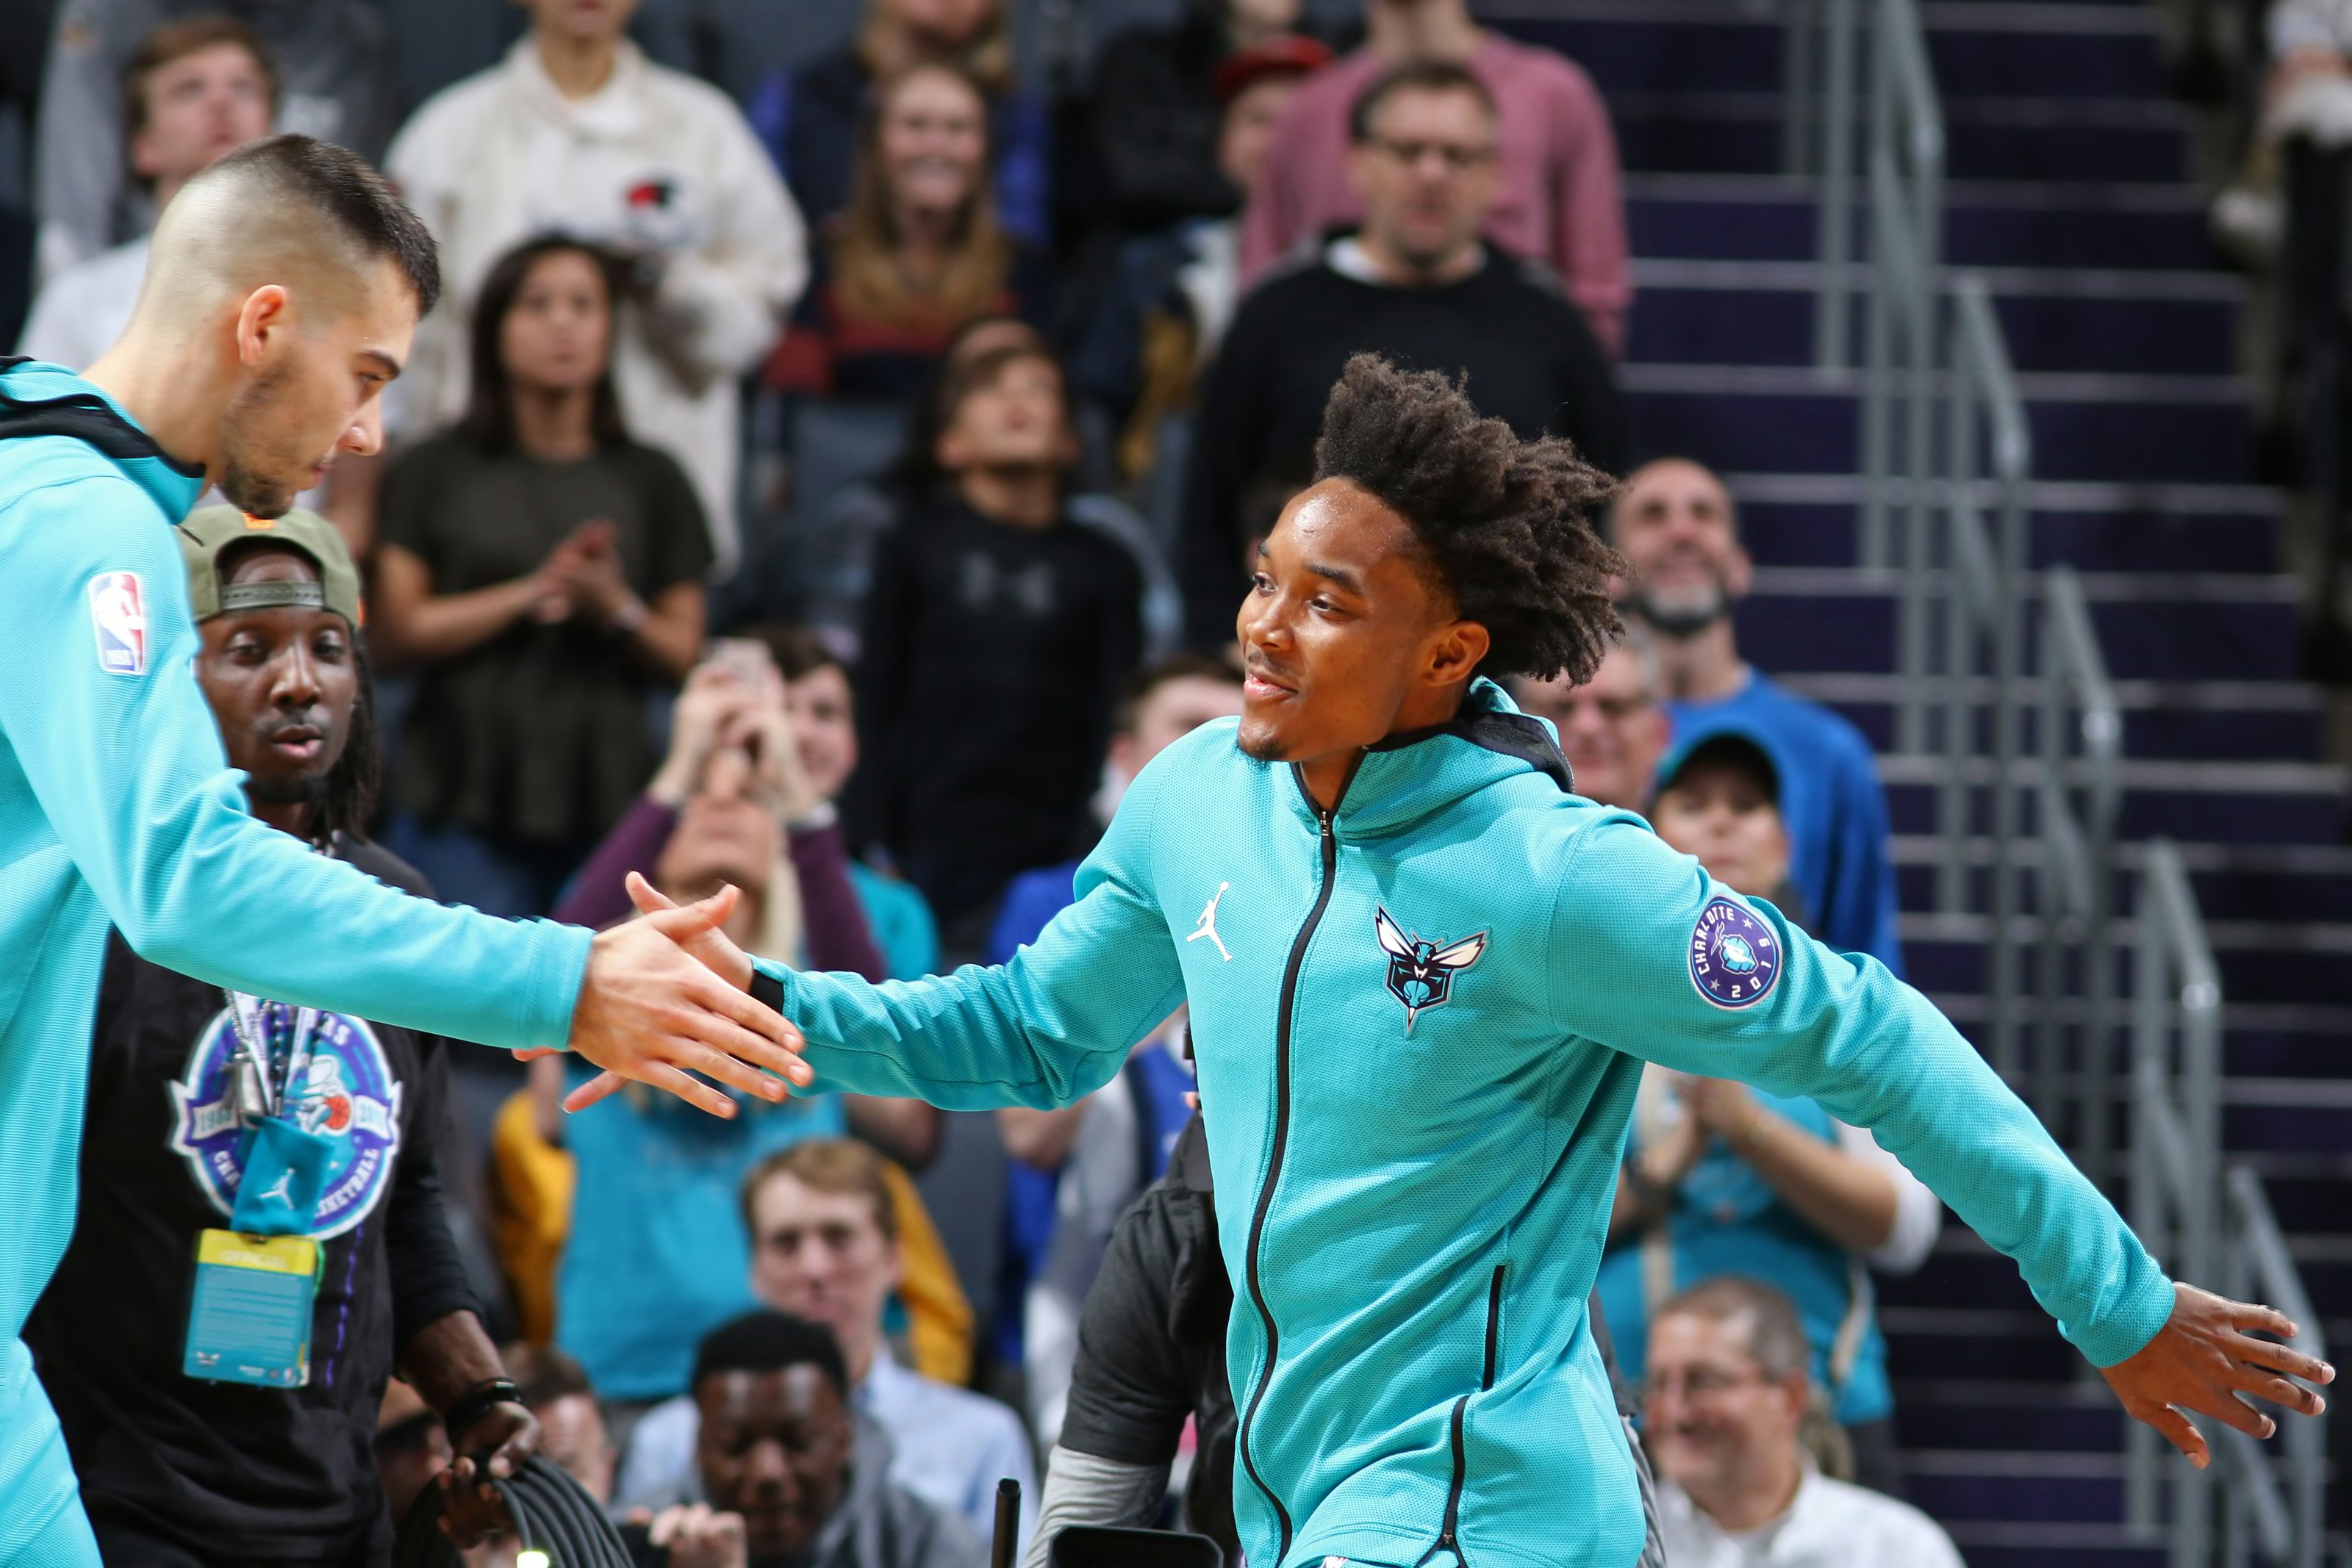 4 players who need to step up for the Charlotte Hornets this season